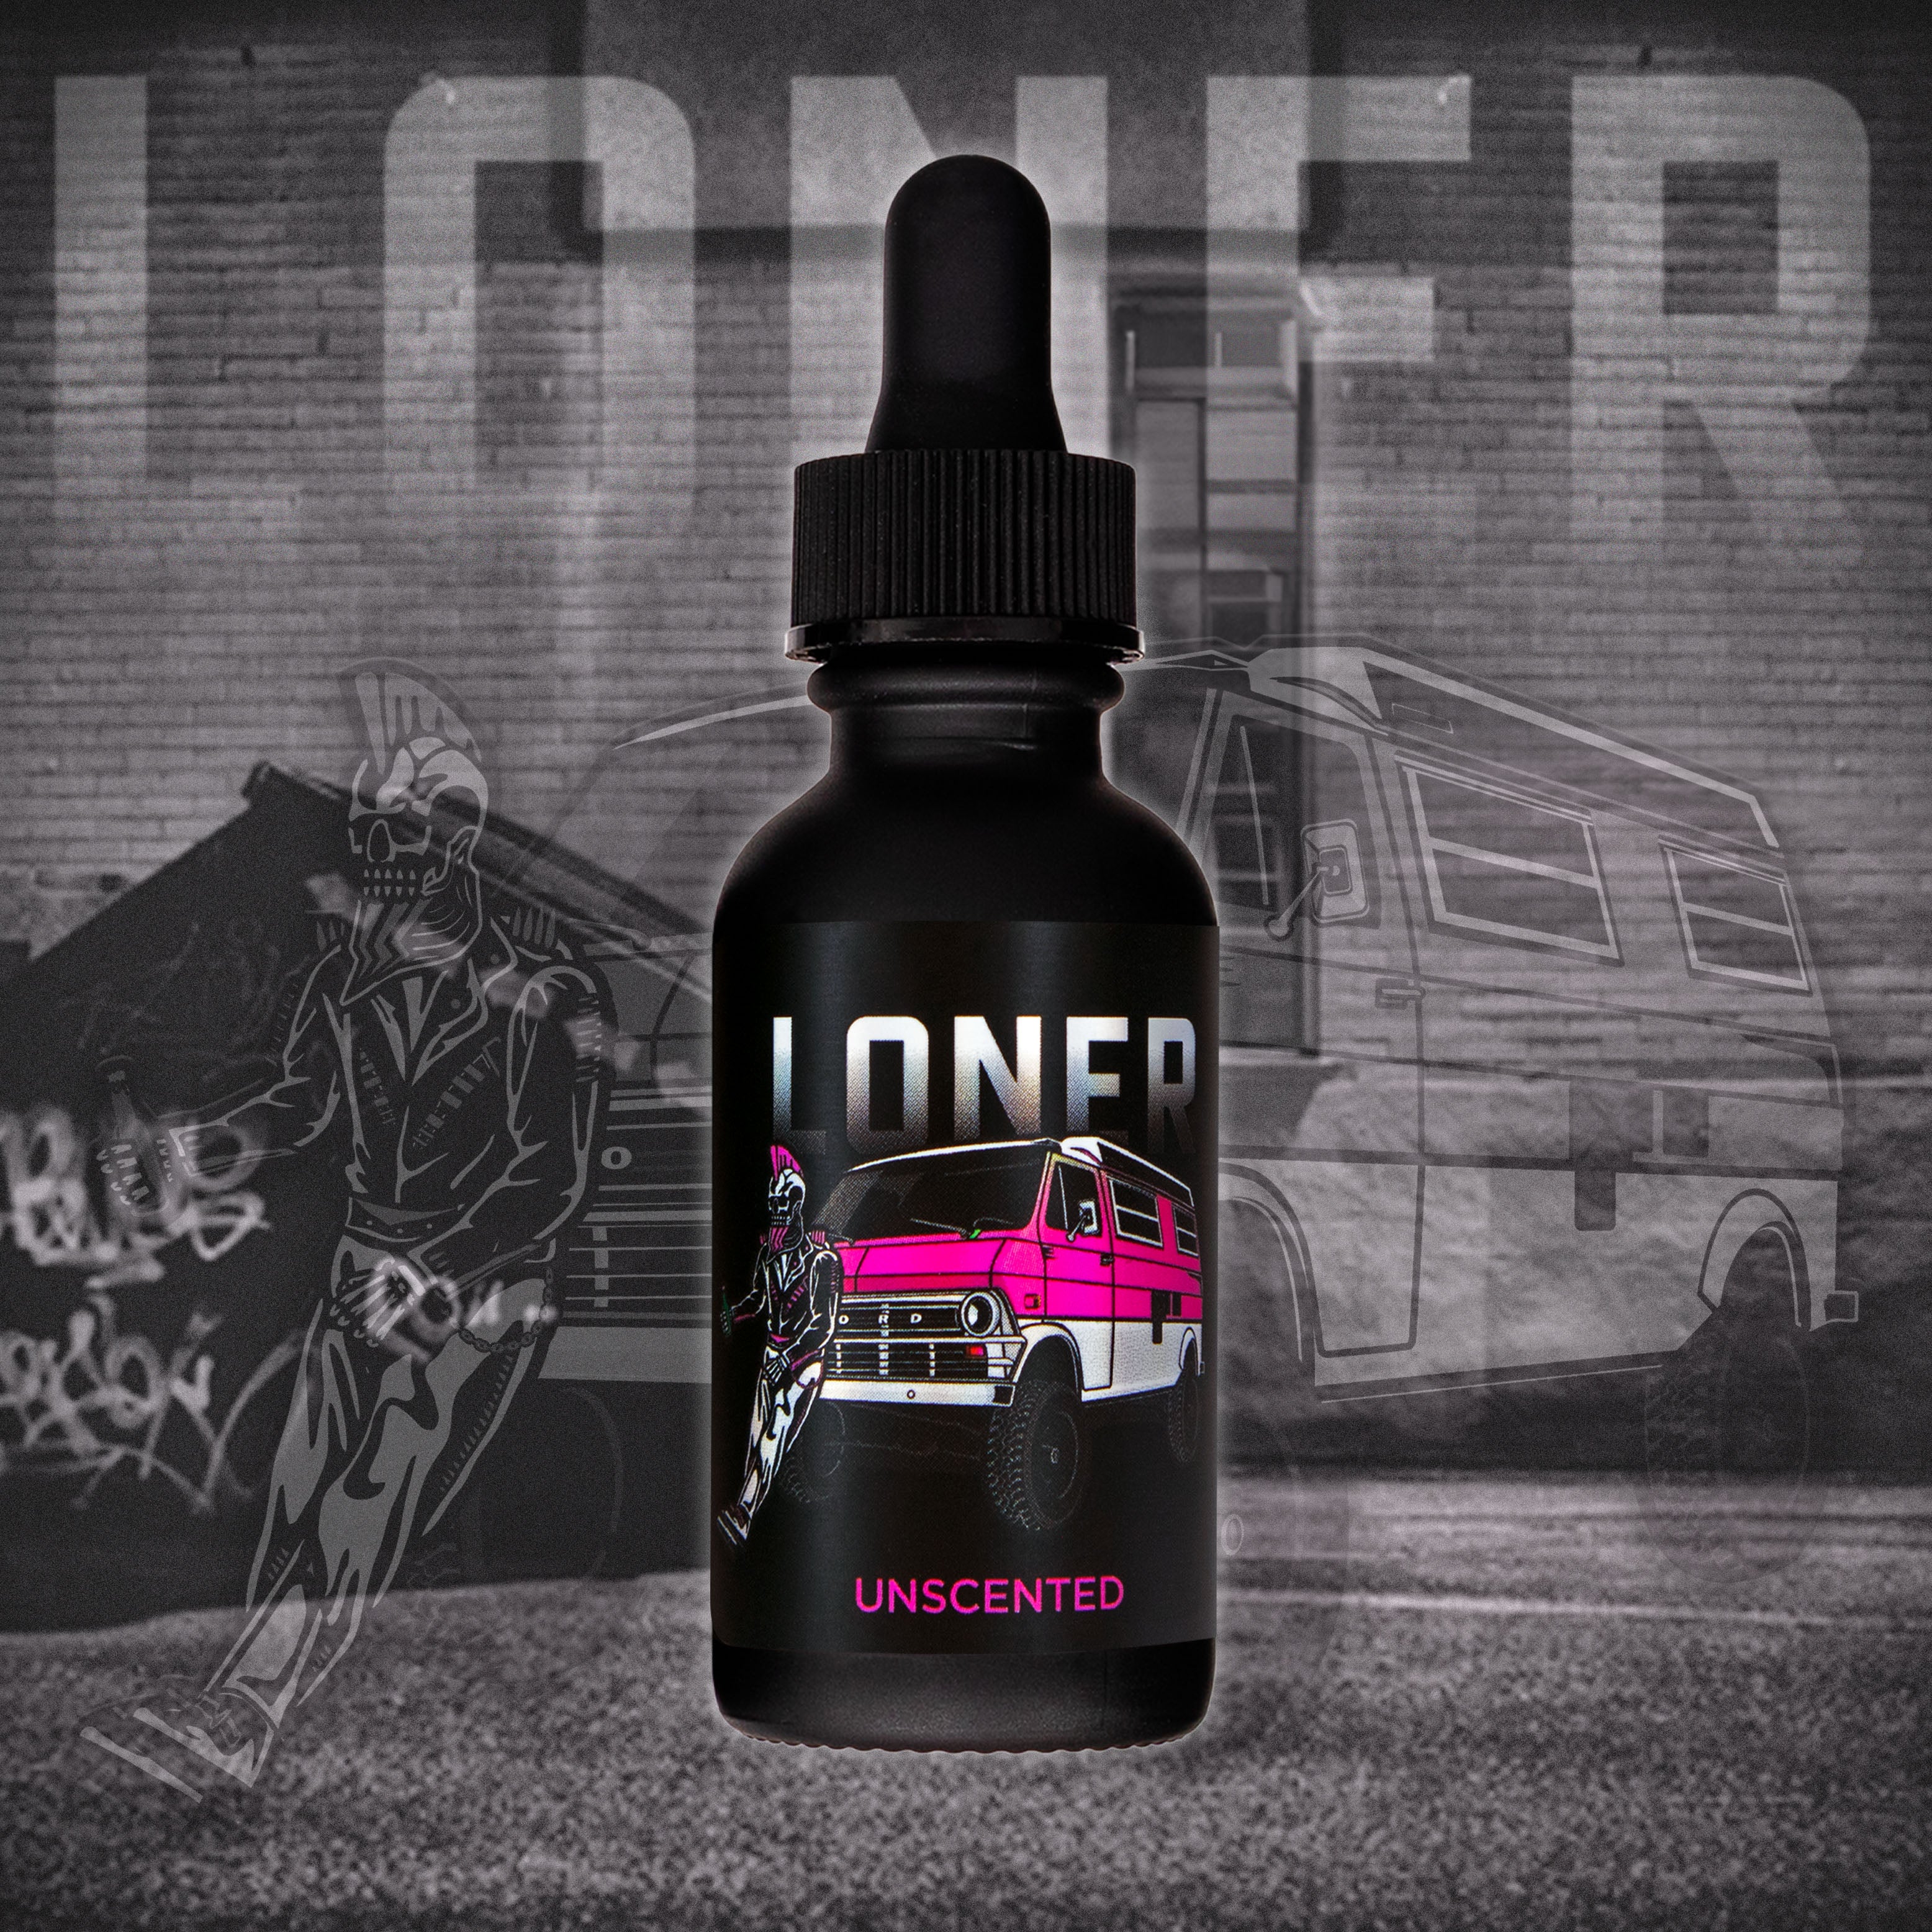 THE LONER (unscented)